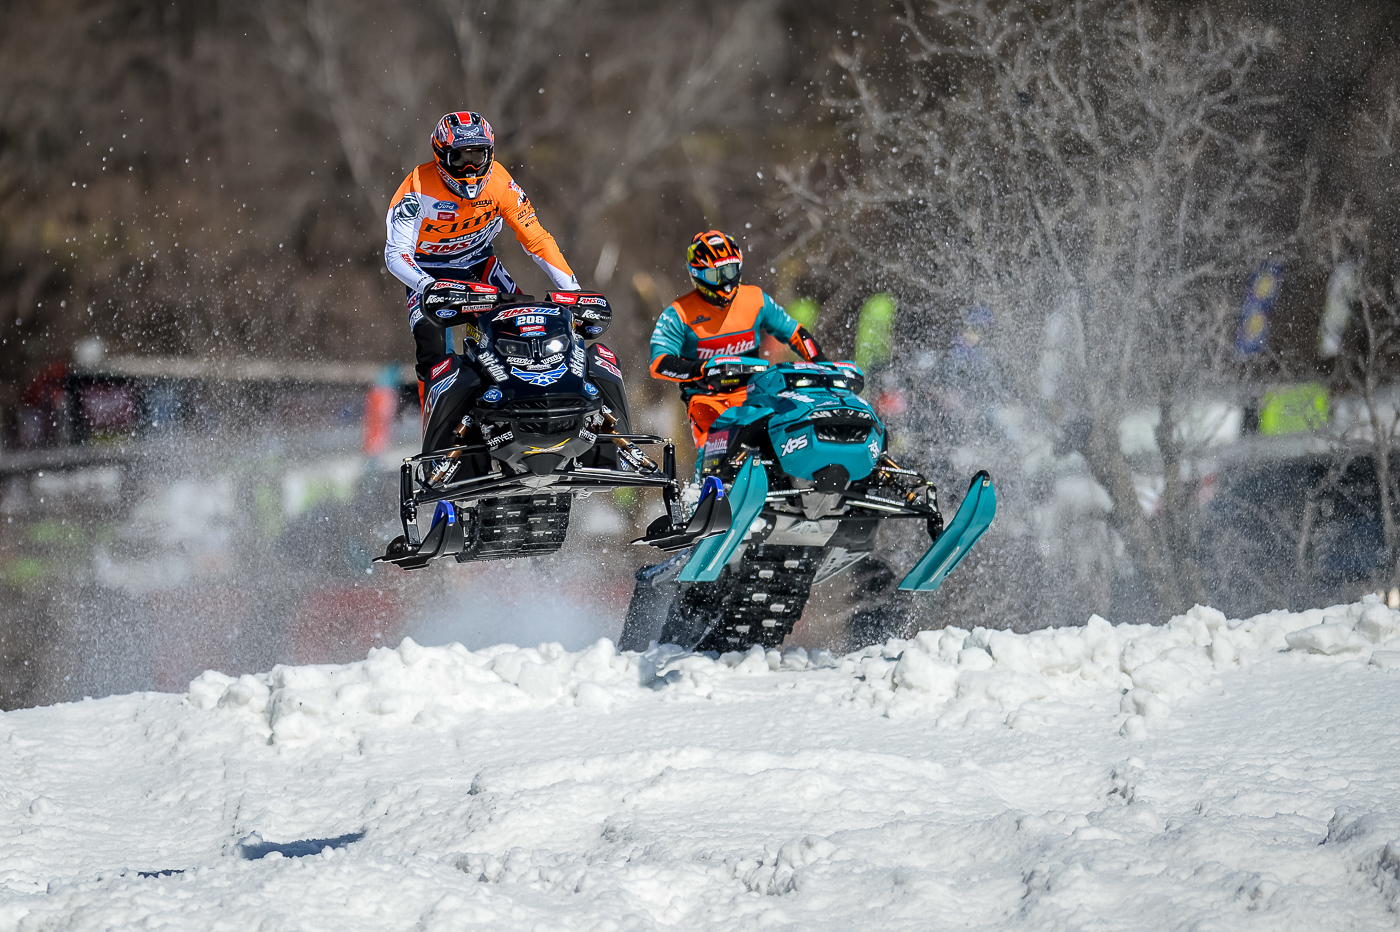 2019 AMSOIL Year in Review: Racing & Events